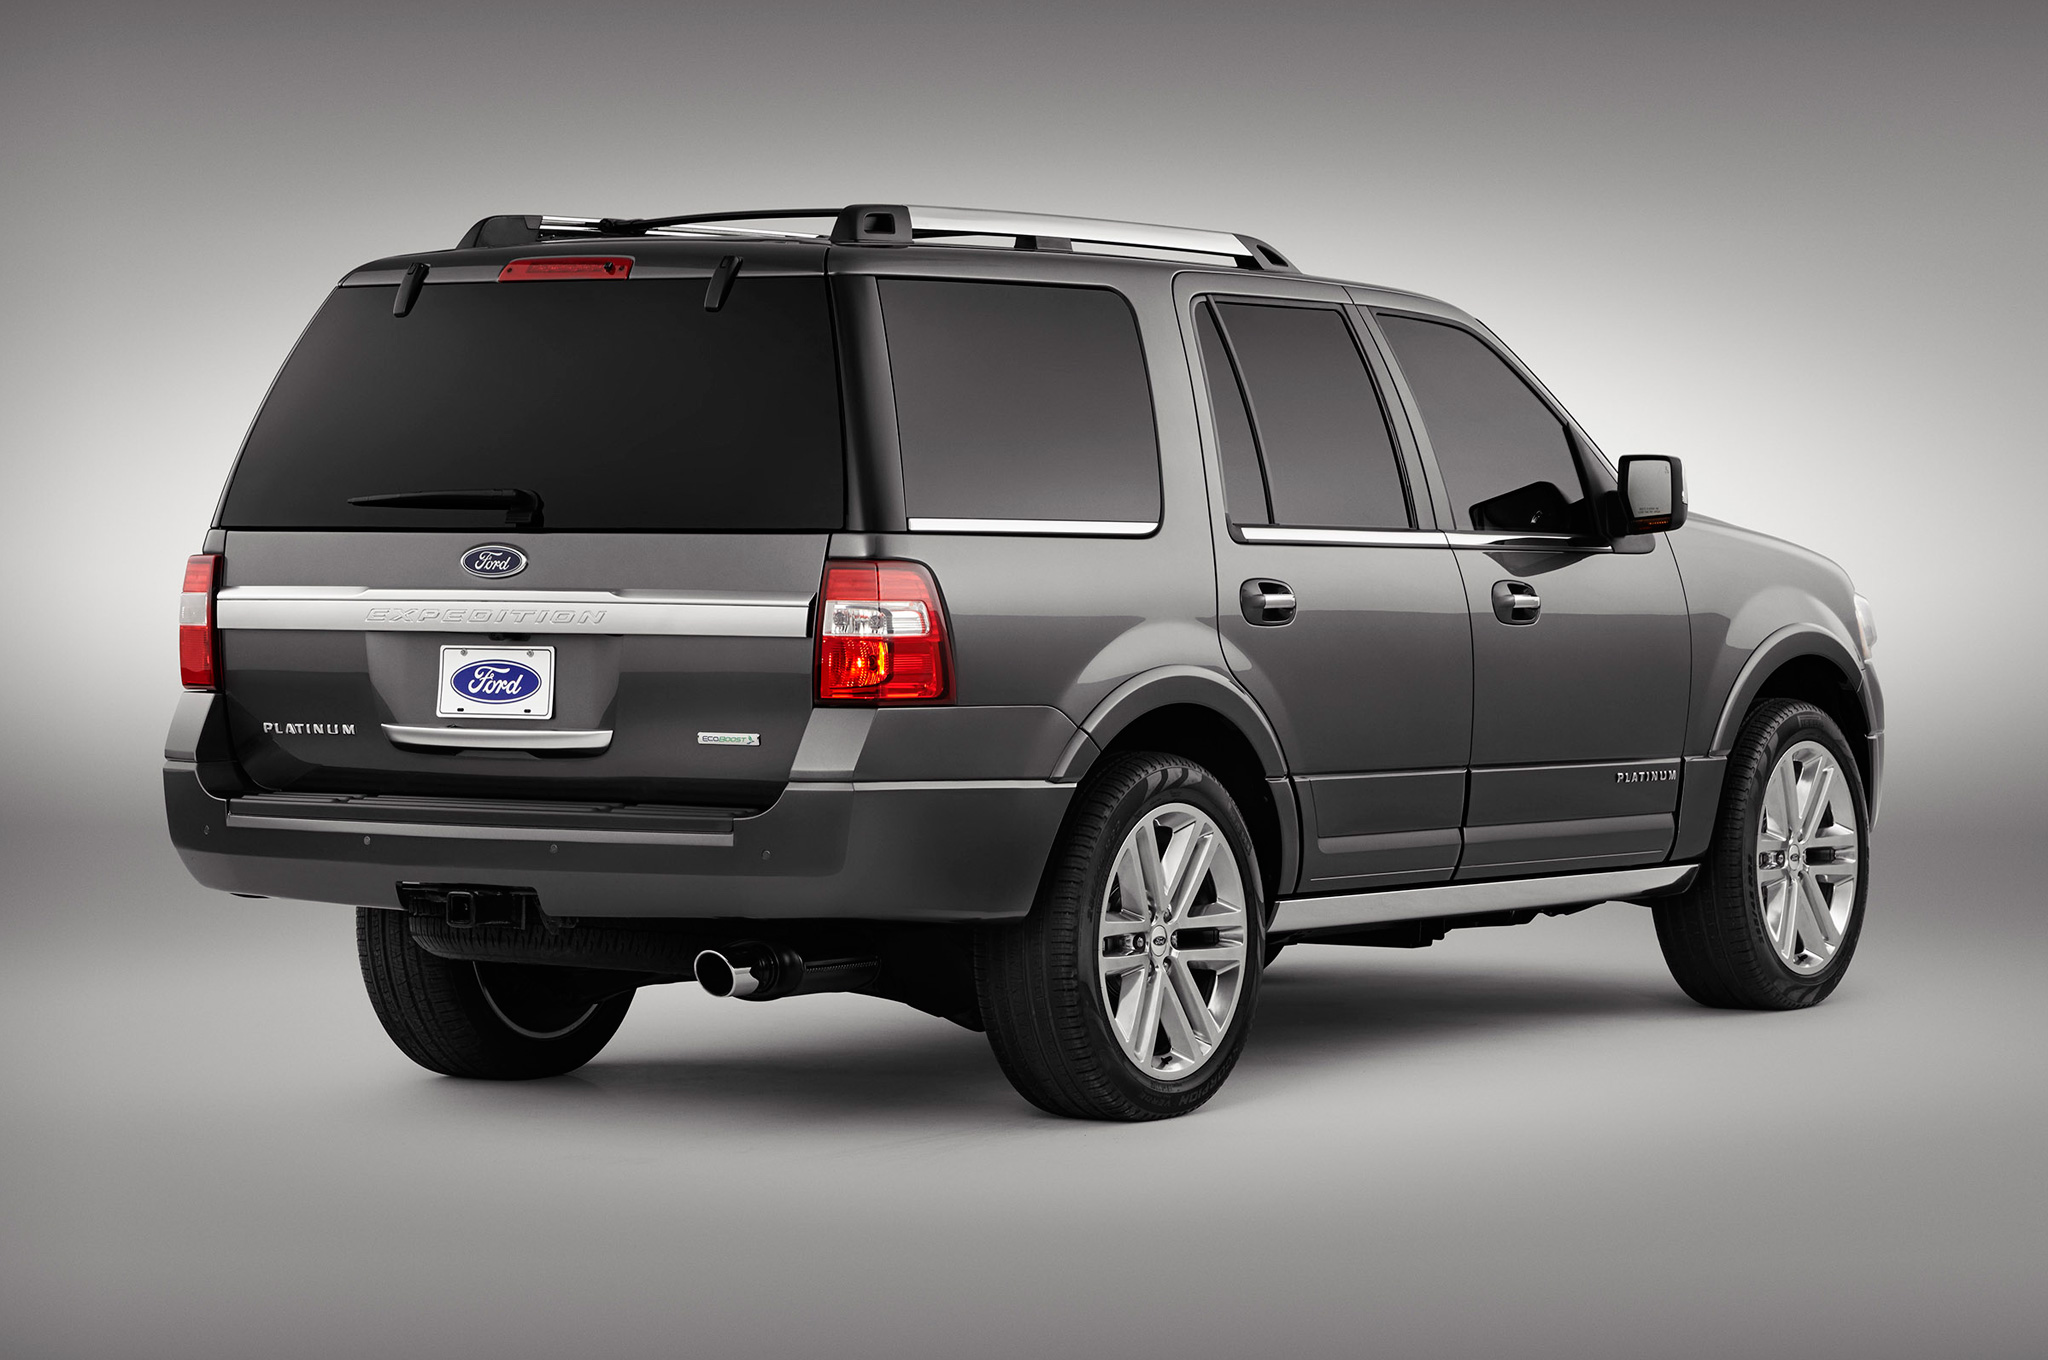 Ford Expedition #12